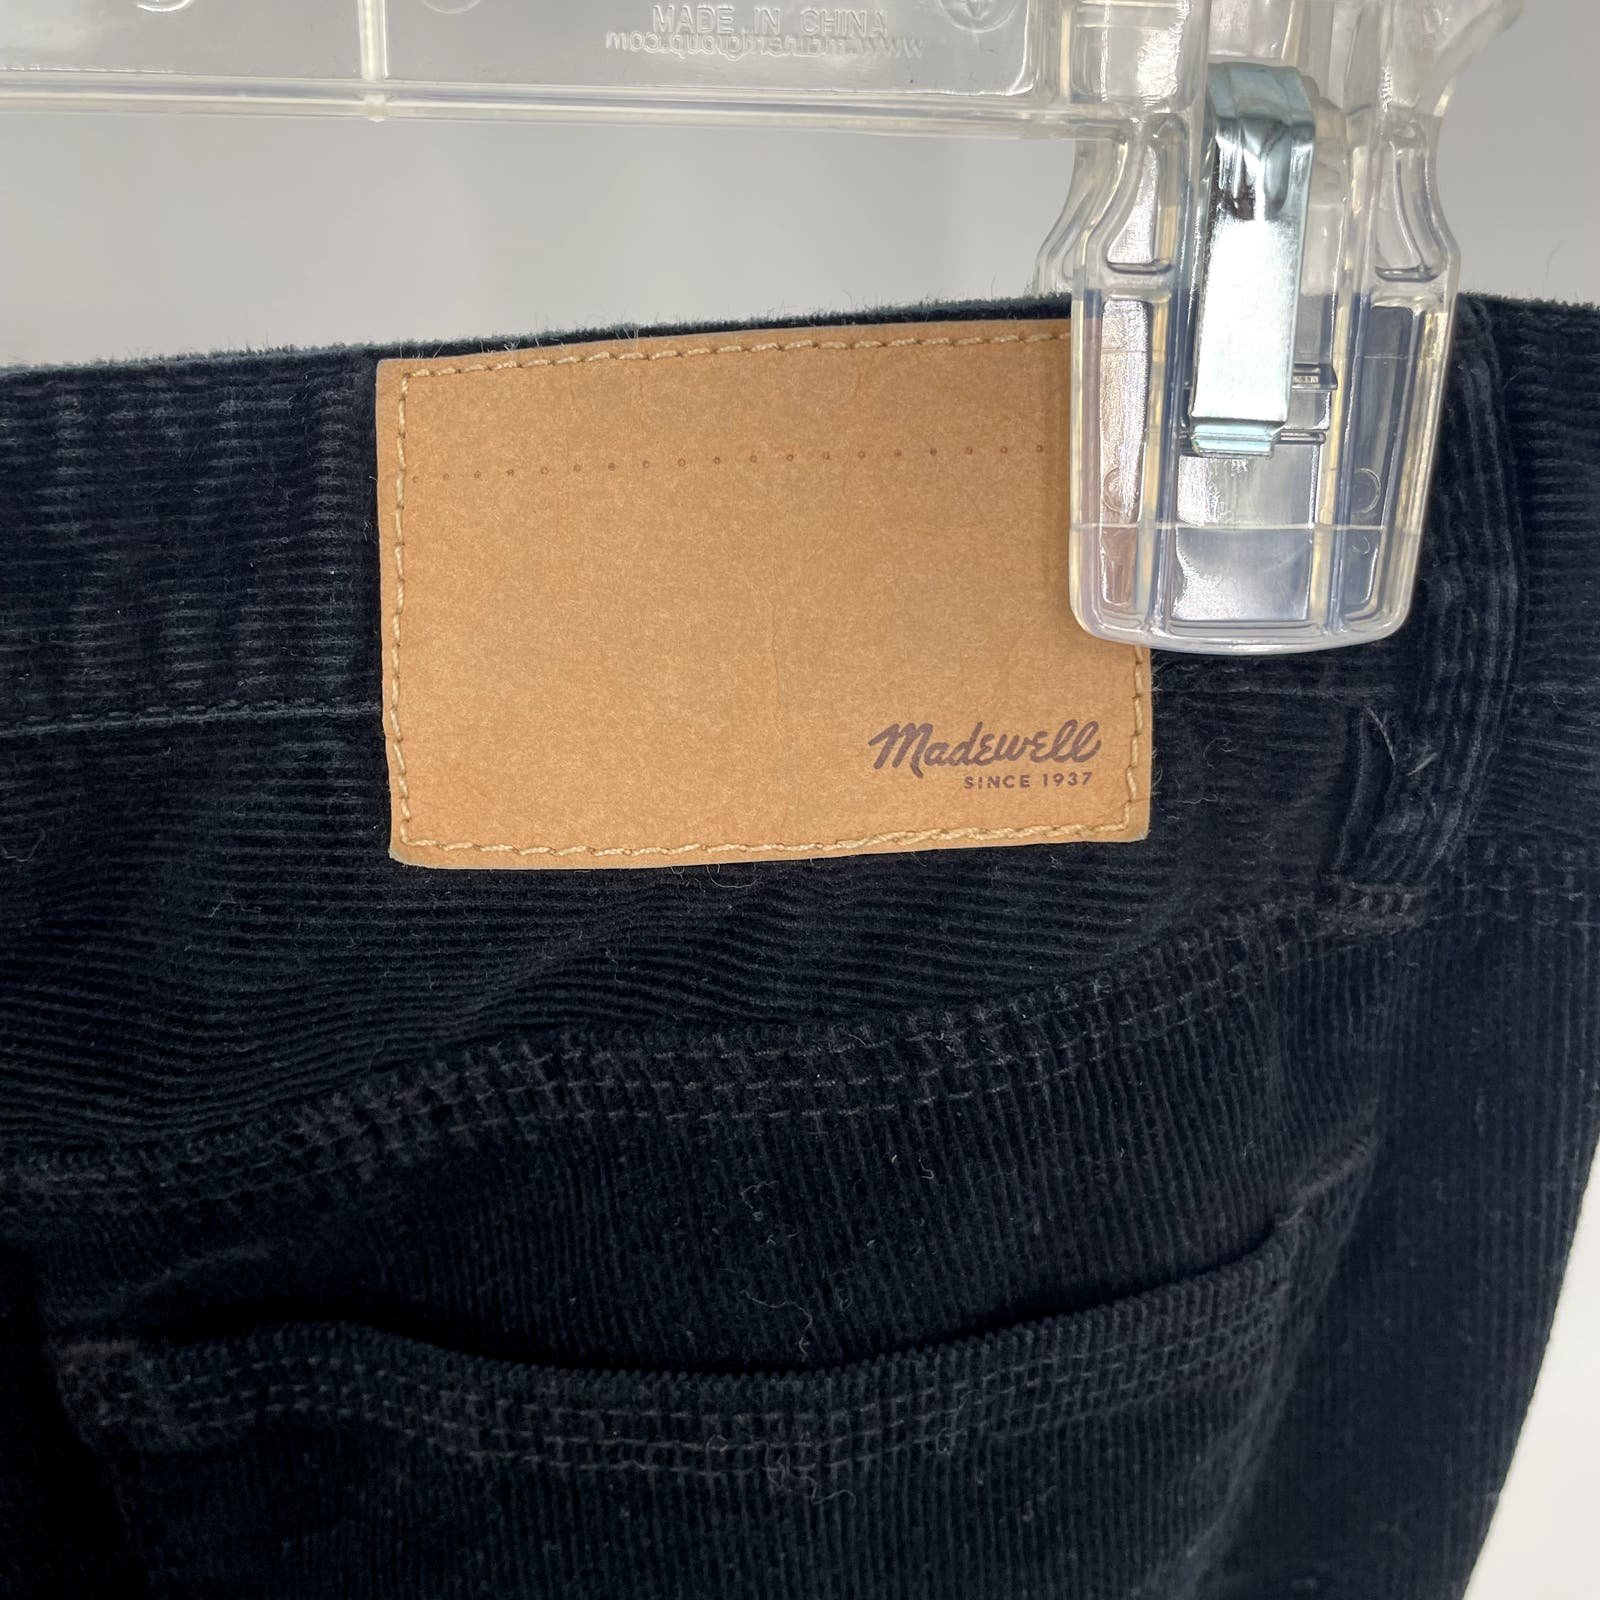 Authentic Madewell Black Skinny Low Corduroy Pants Size 24 kQrCglbY3 Counter Genuine 